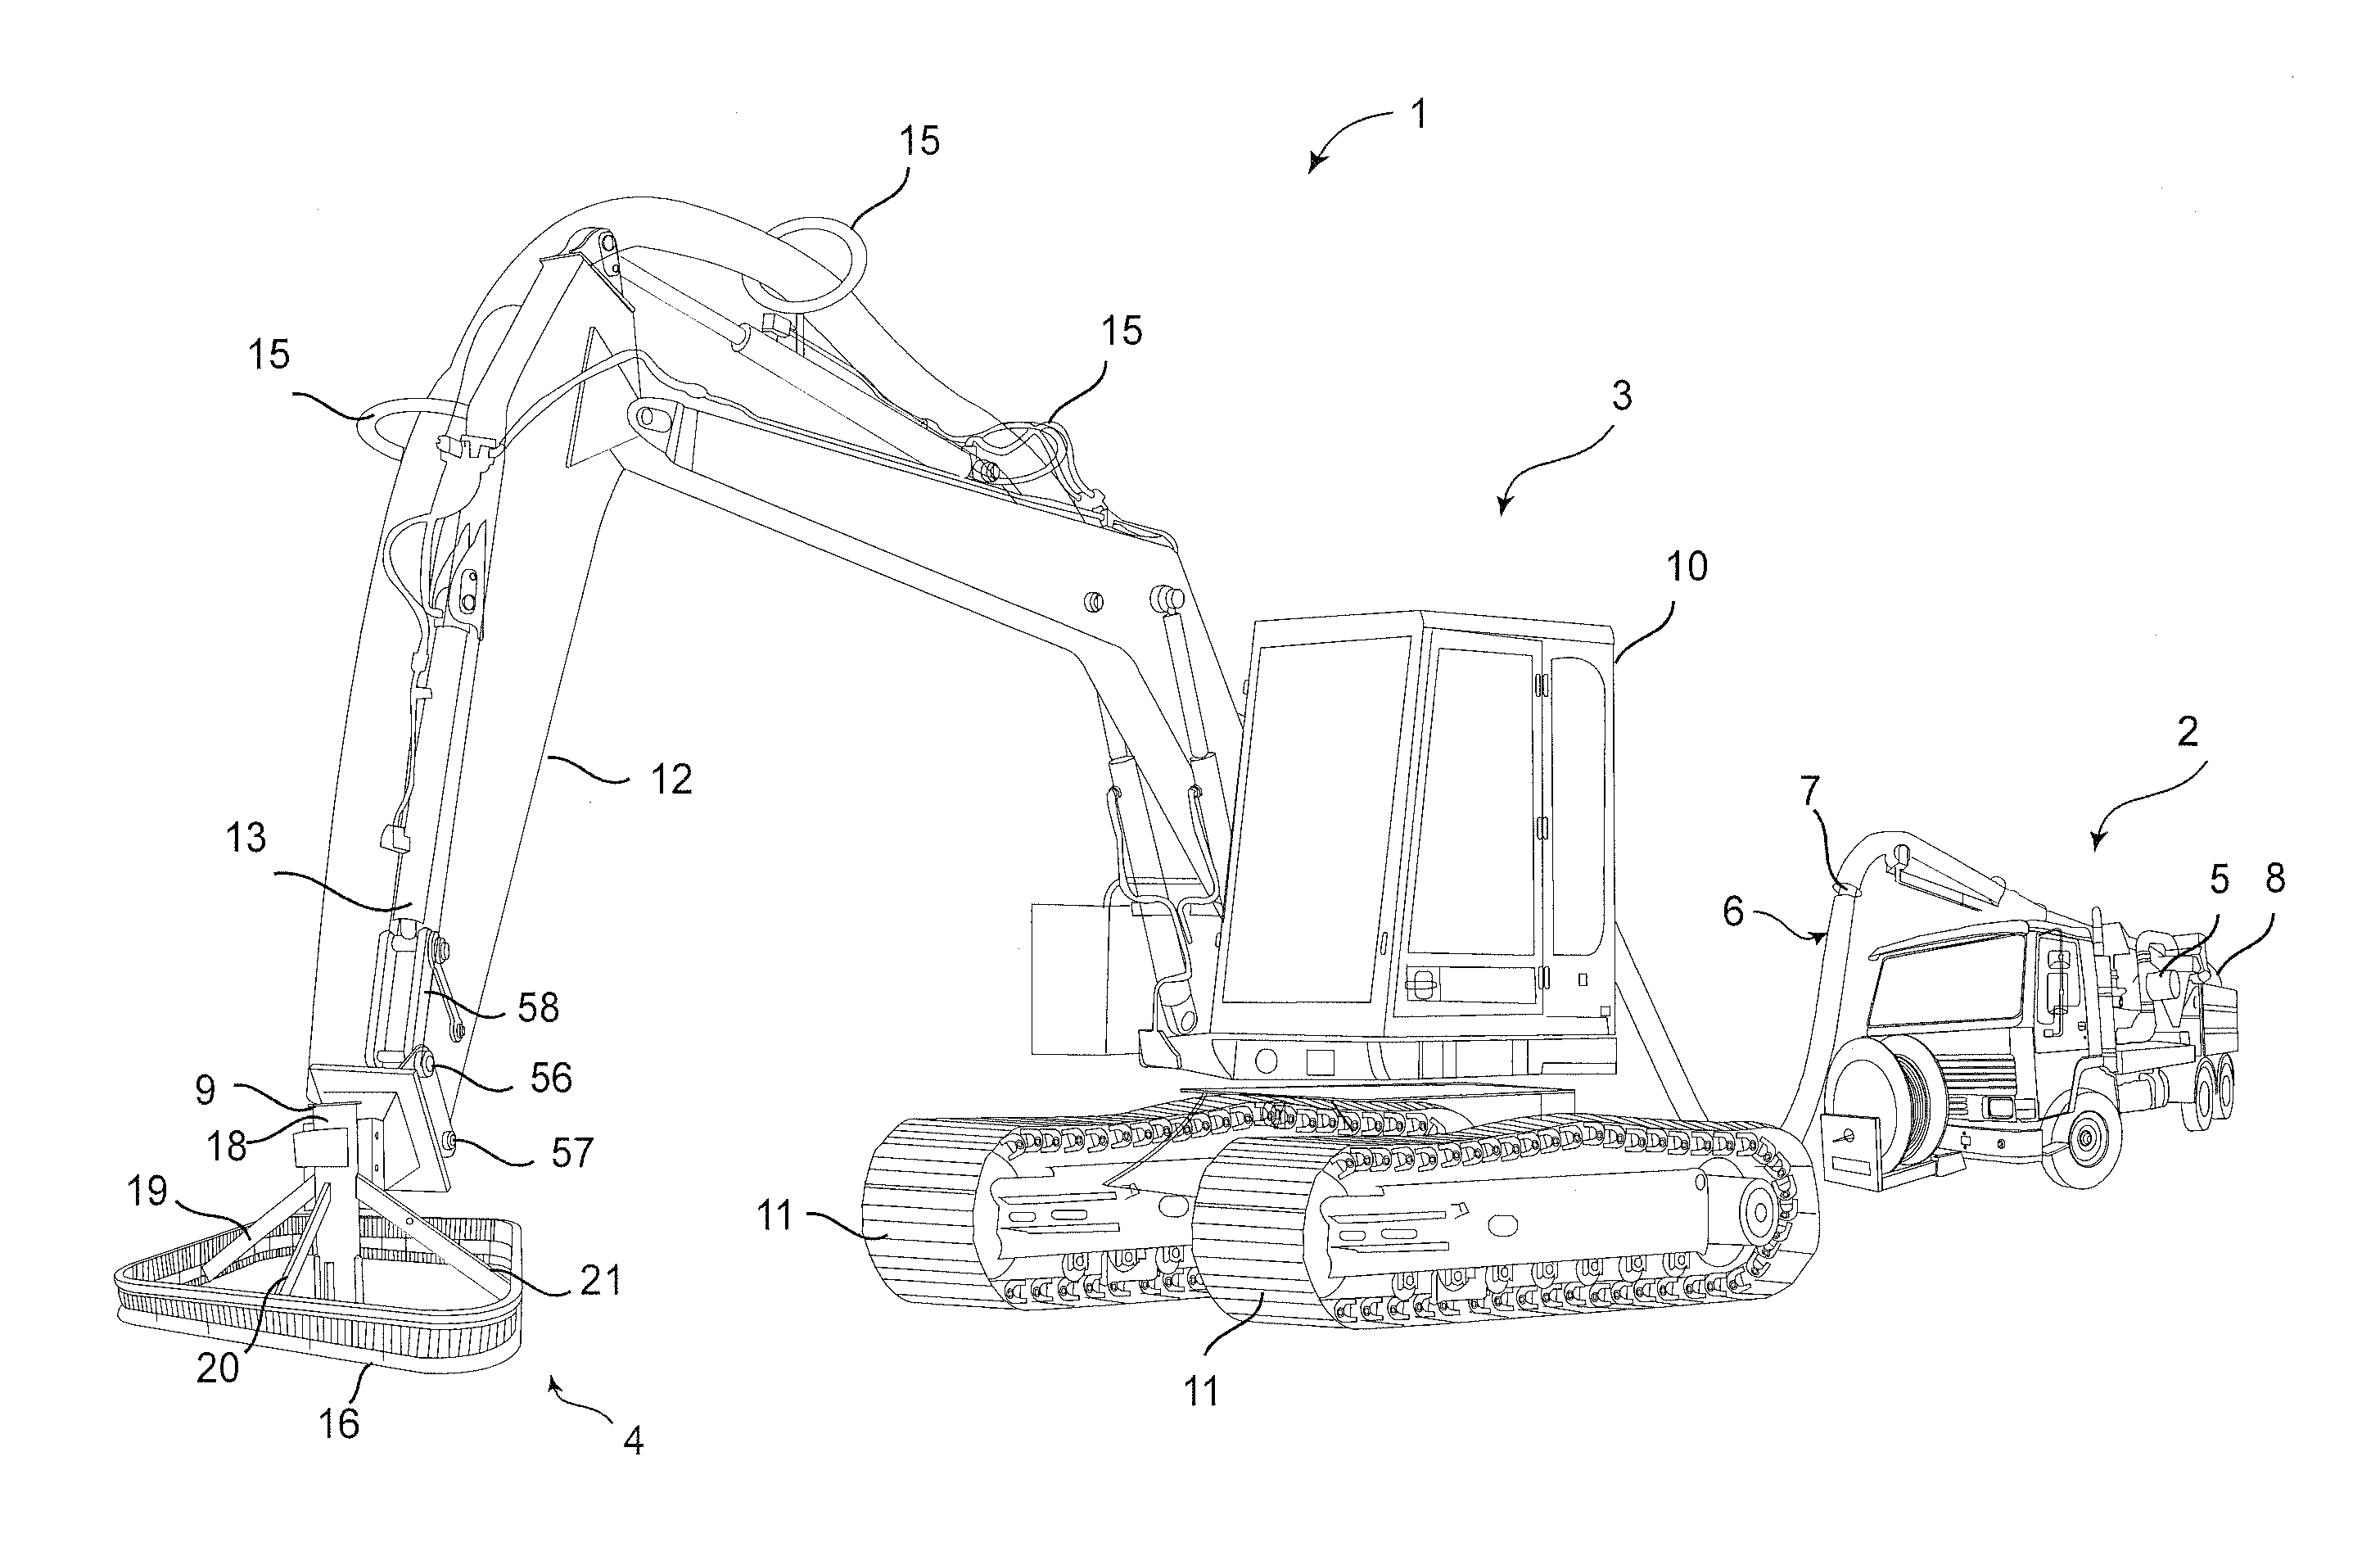 Oil skimmer assembly and system